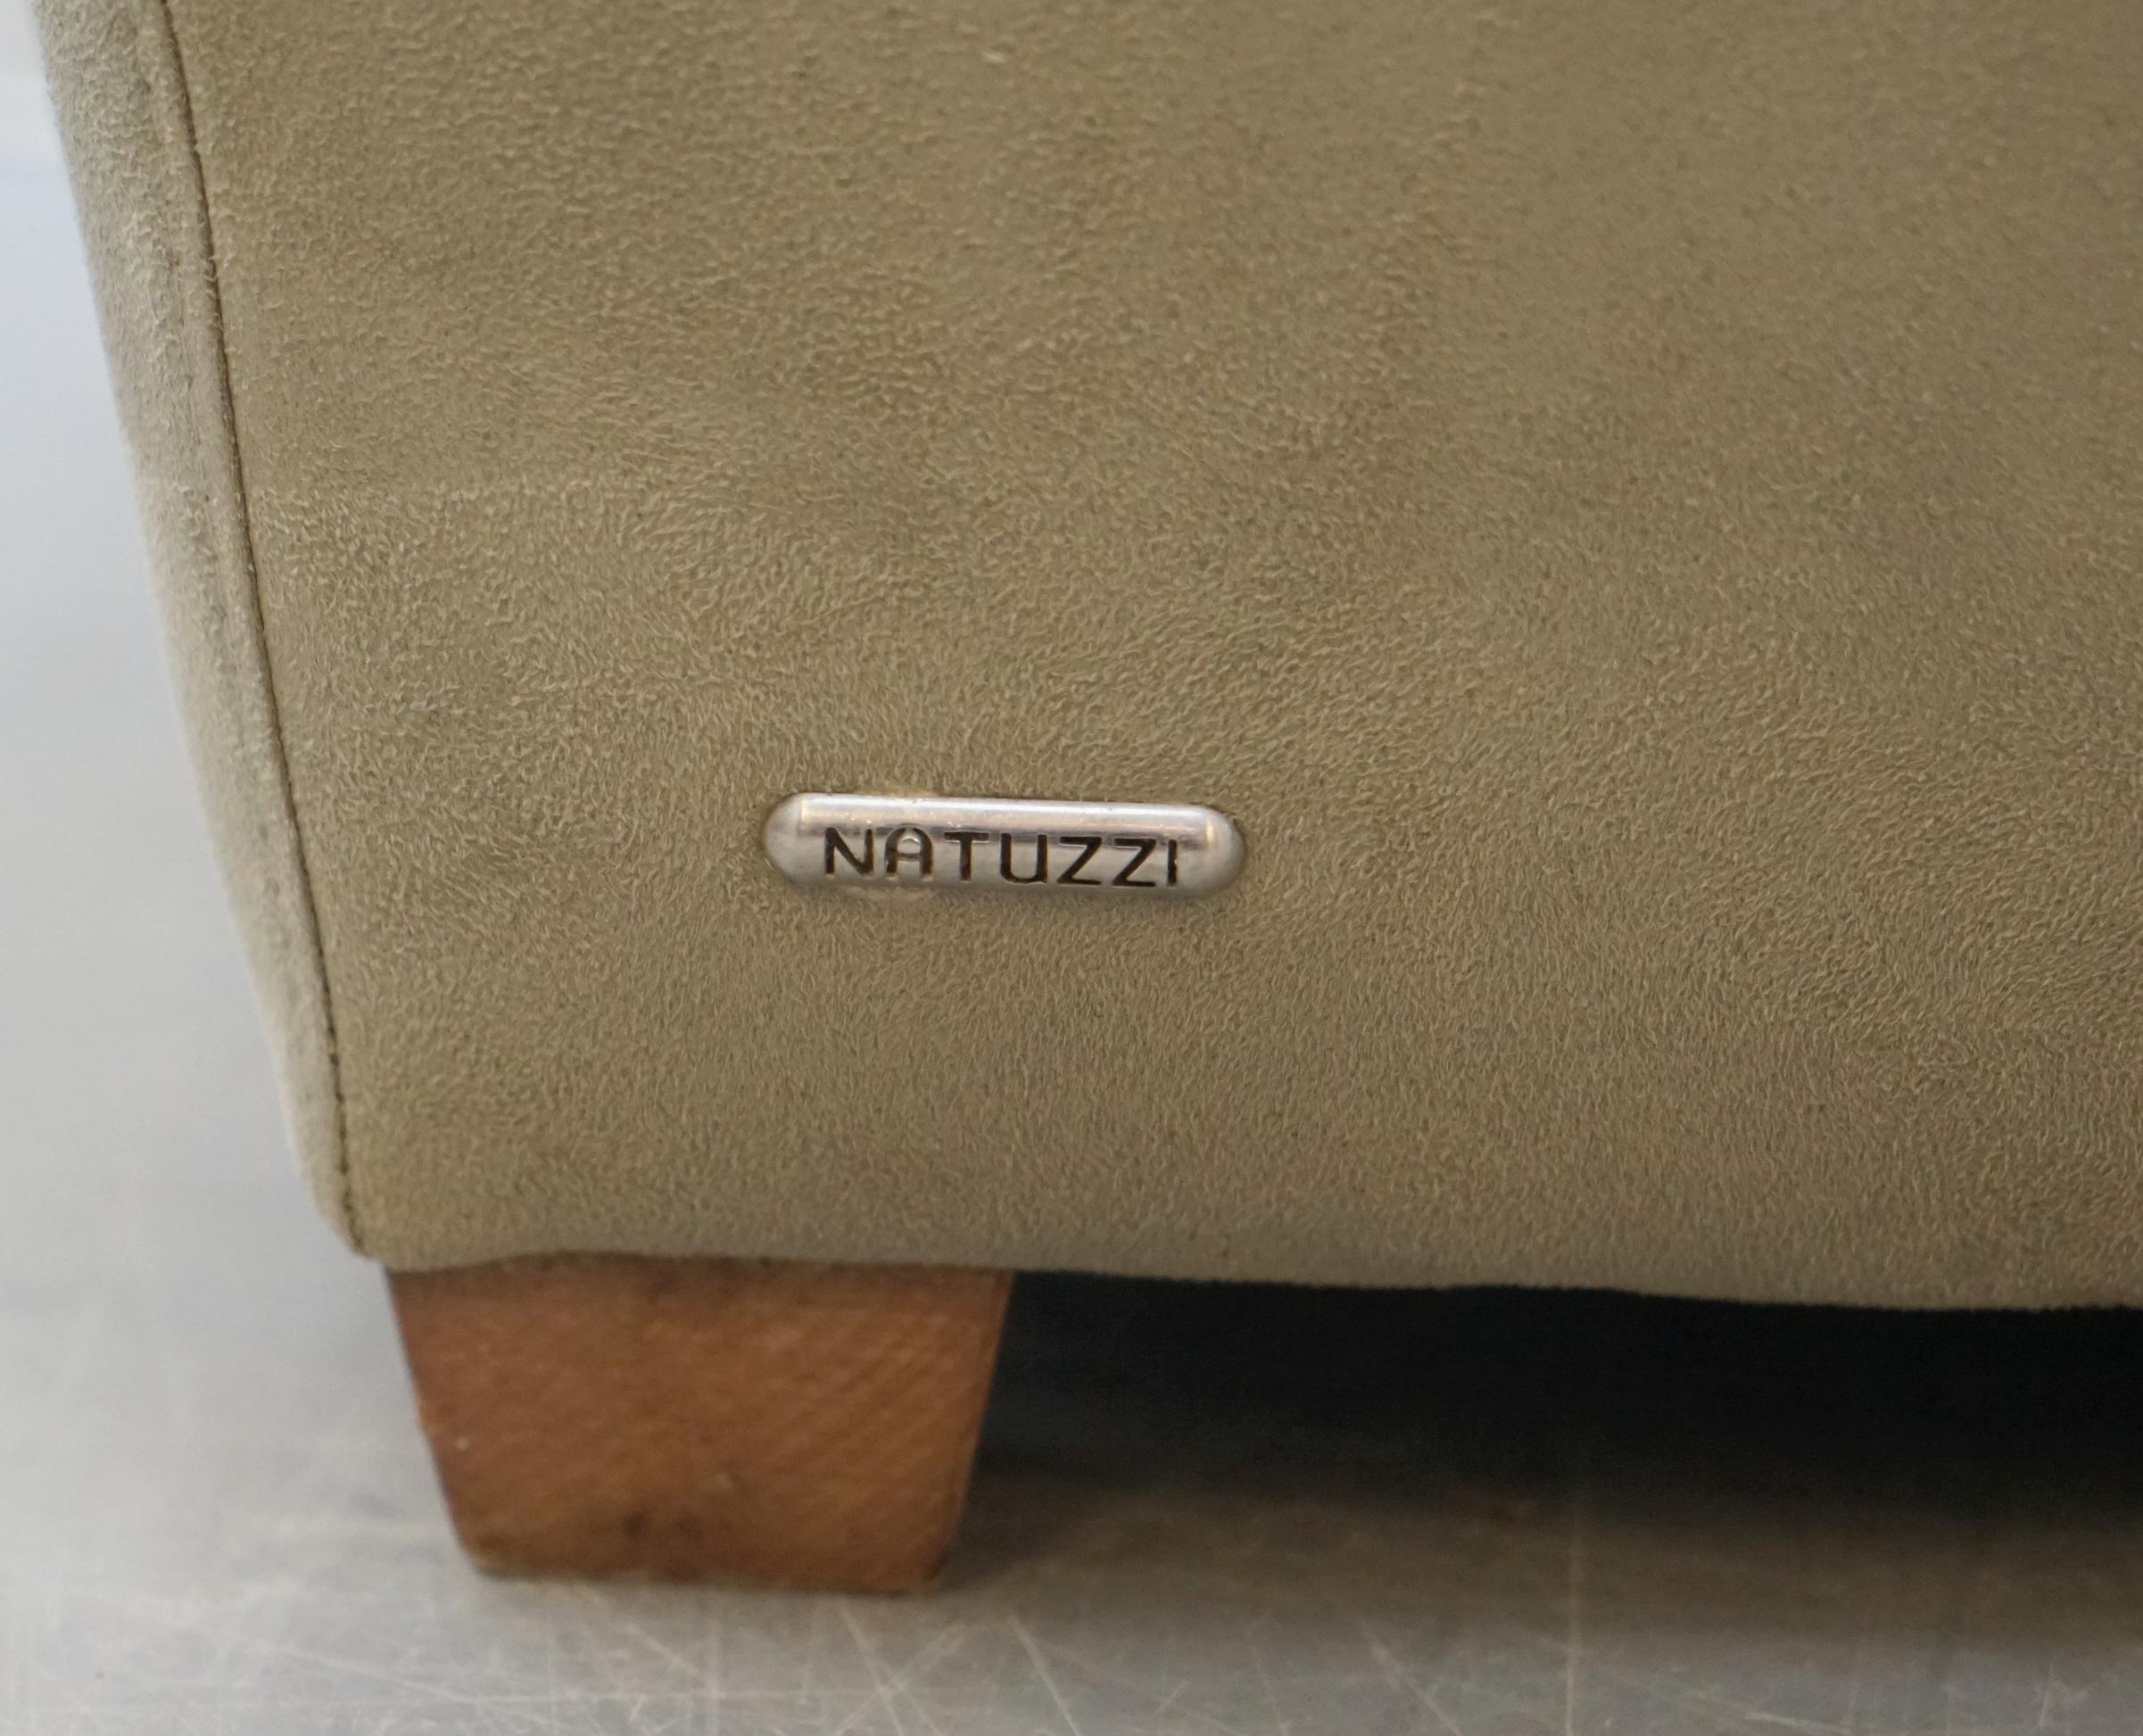 Natuzzi Made in Italy Suede Grey Upholstery Armchair Professionally Cleaned 10